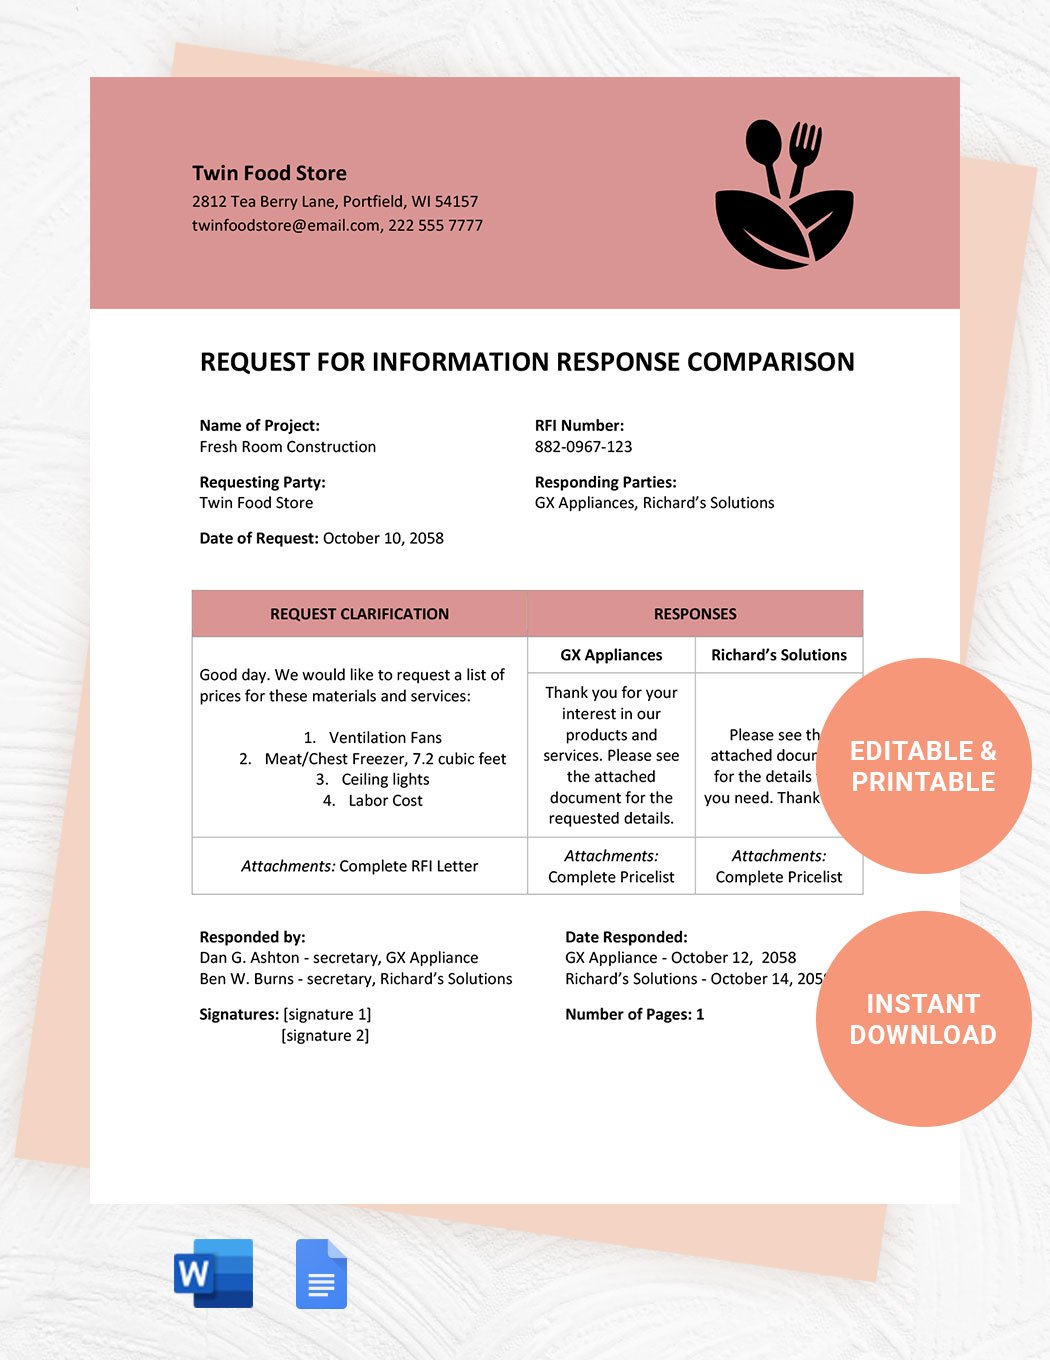 Request For Information Response Template Download in Word, Google